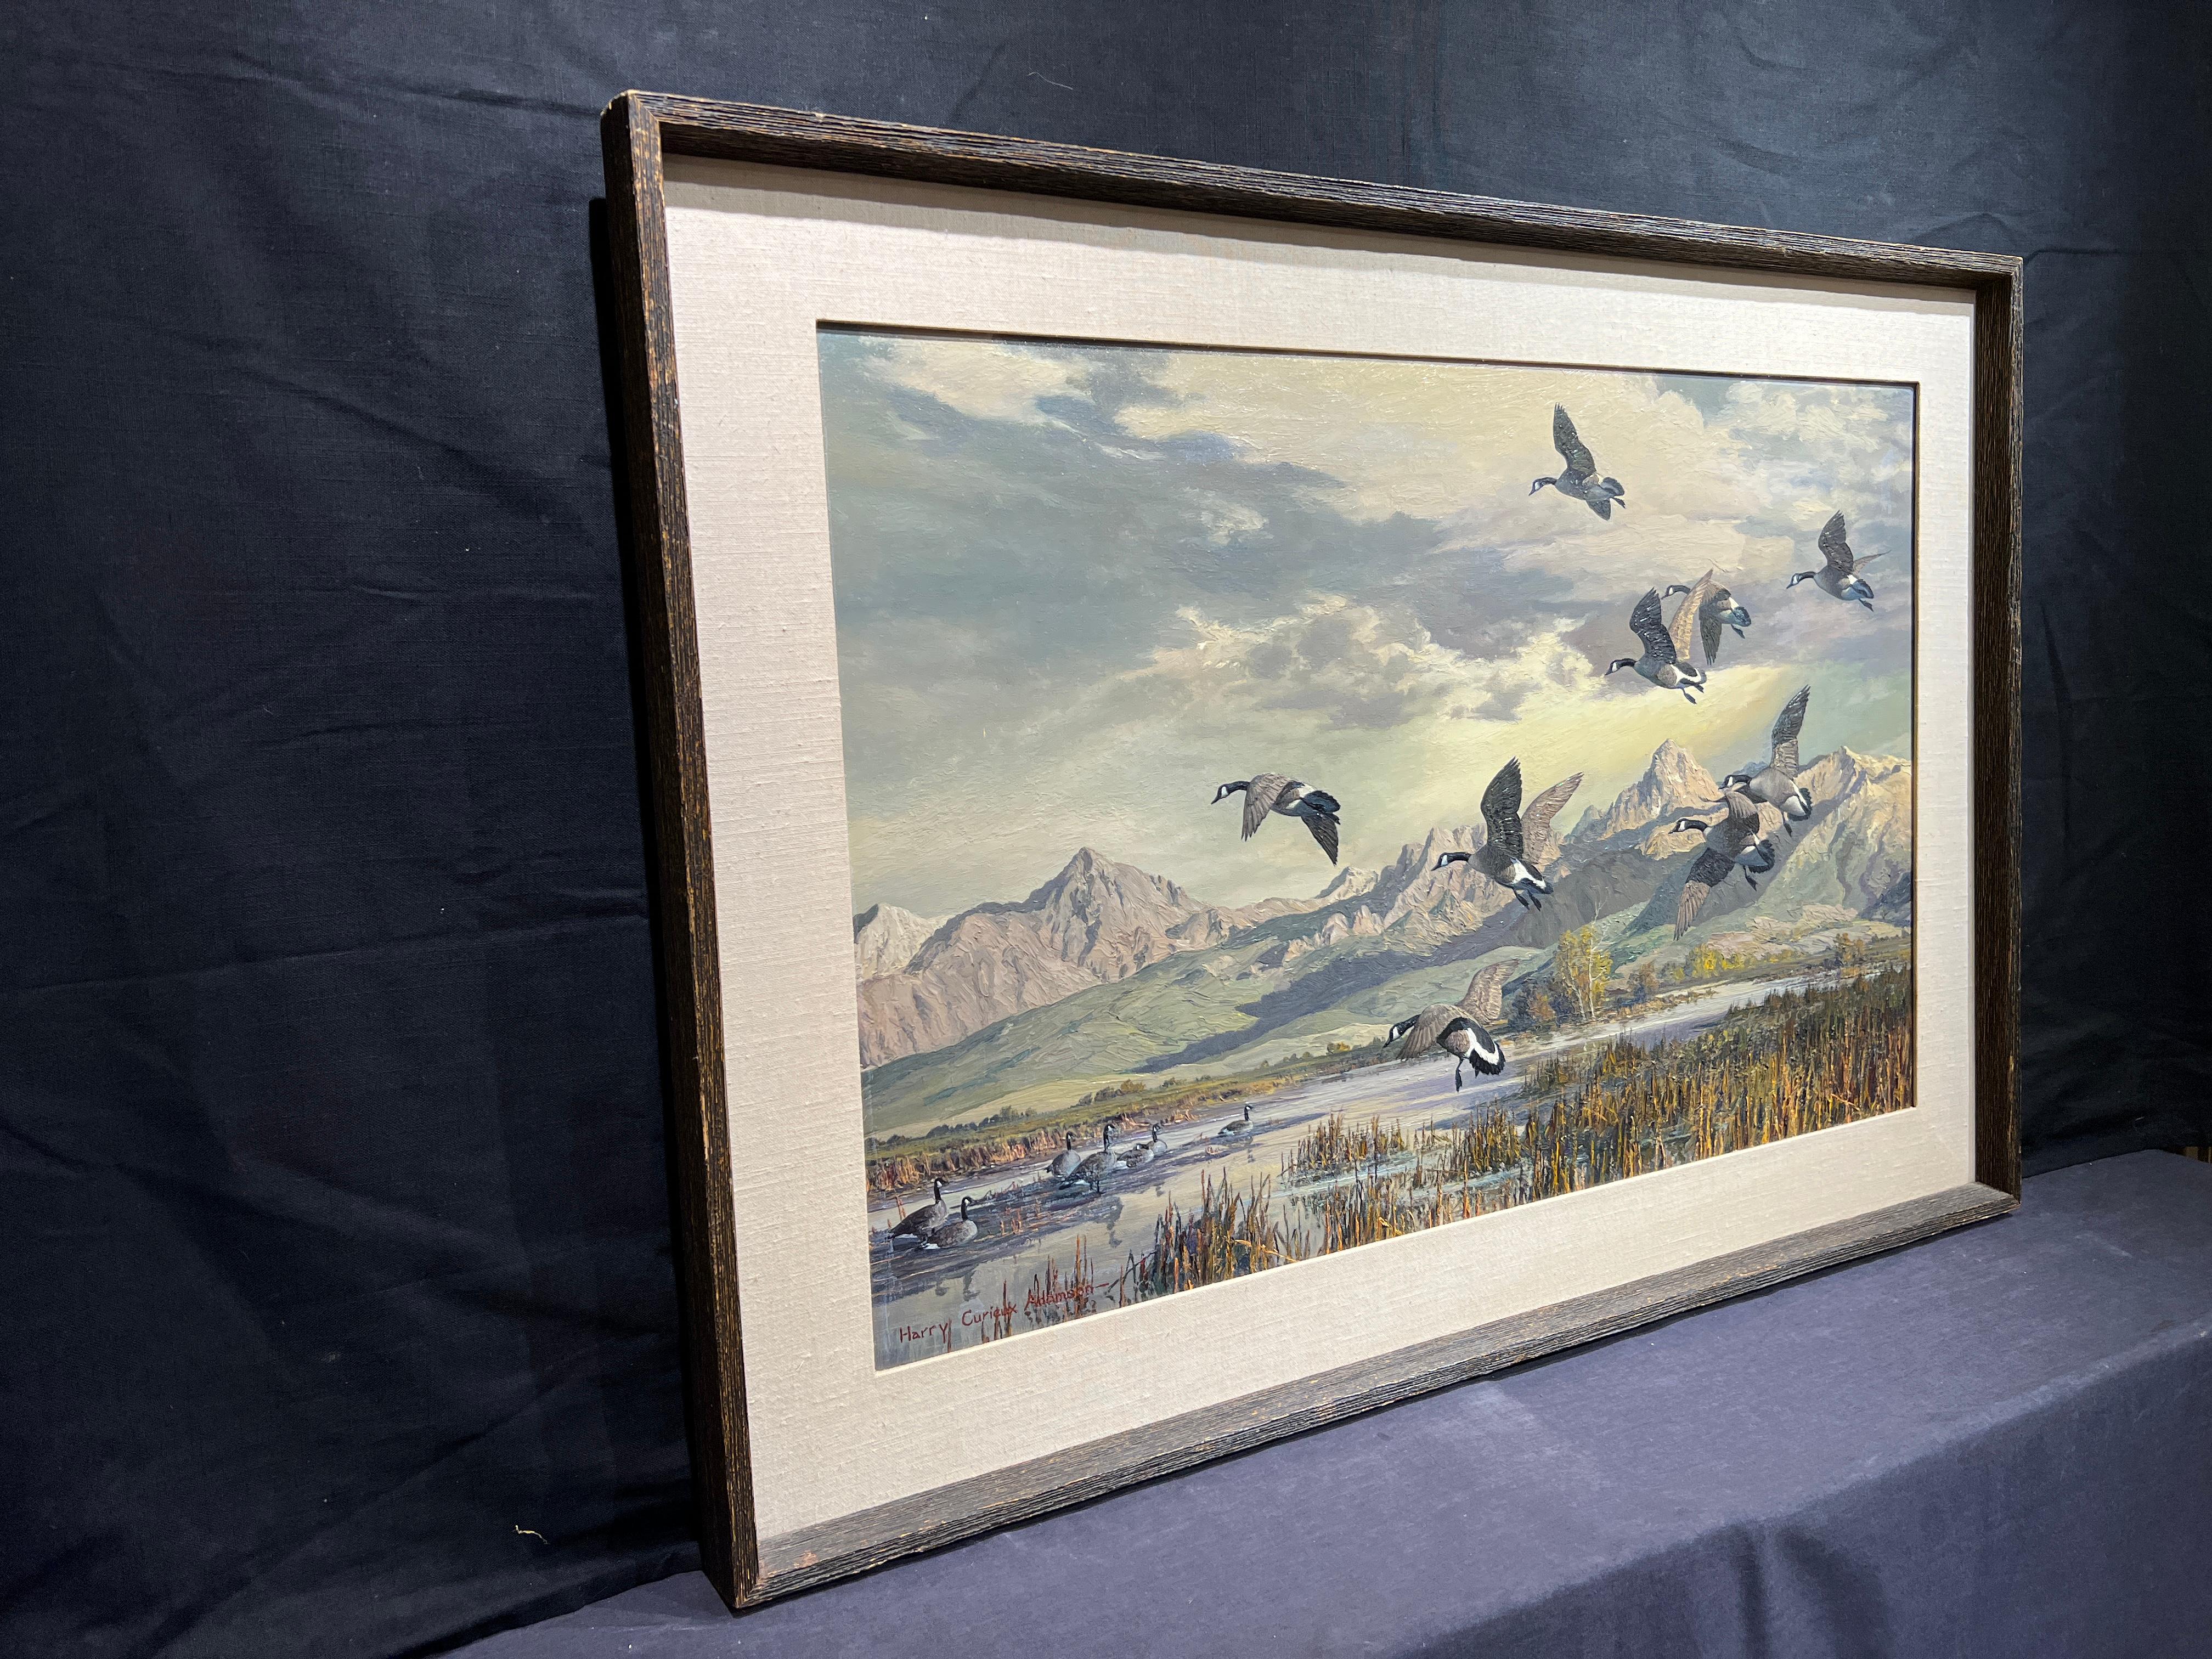 Geese and Mountains (Cloud Canyon/Autumn Enchantment)
Harry Curieux Adamson (1916-2012)
Signed Lower Left
Unframed: 22